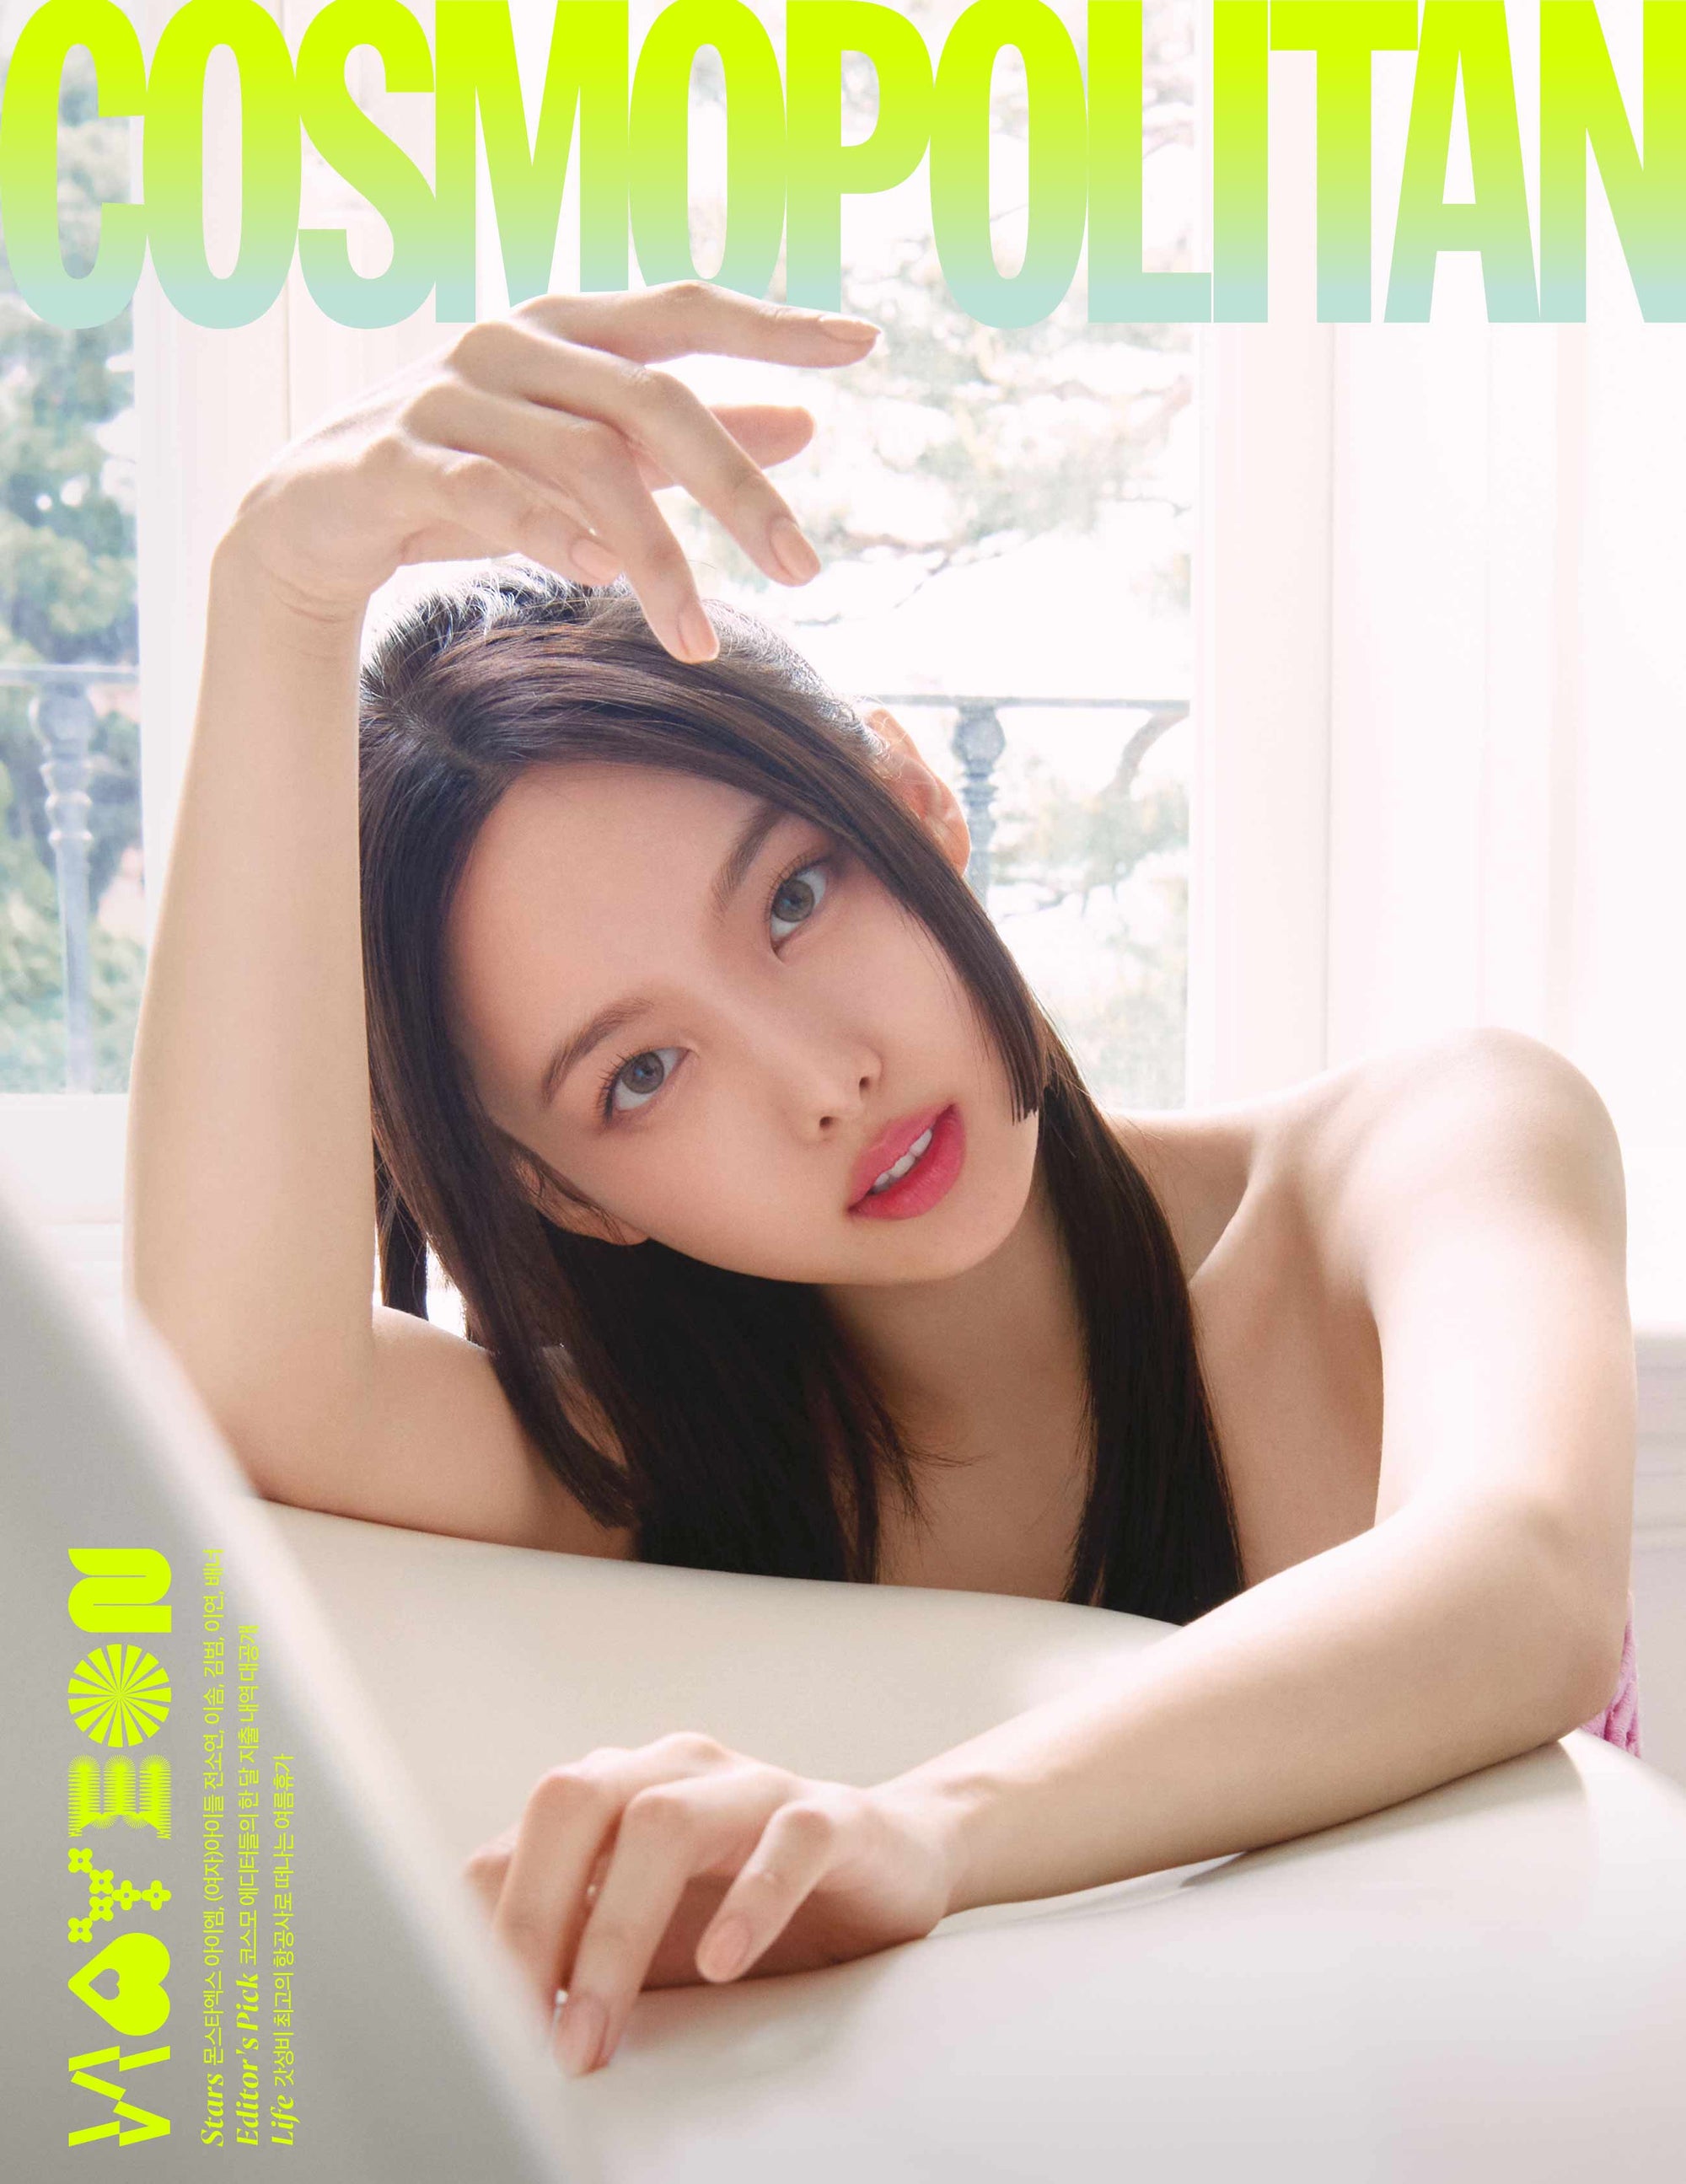 twice nayeon on cover of cosmopolitan